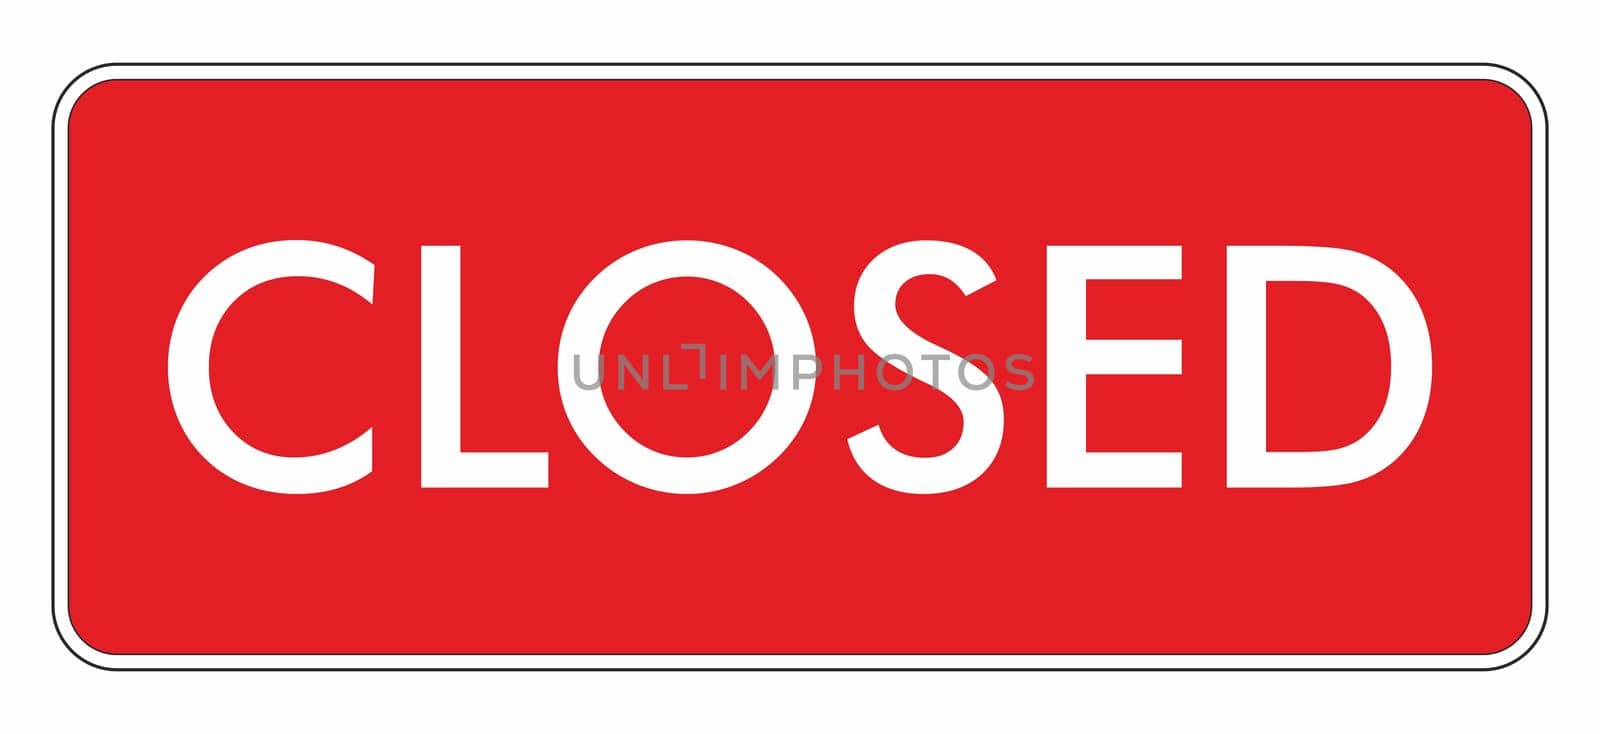 Closed sign illustration, white text over red background